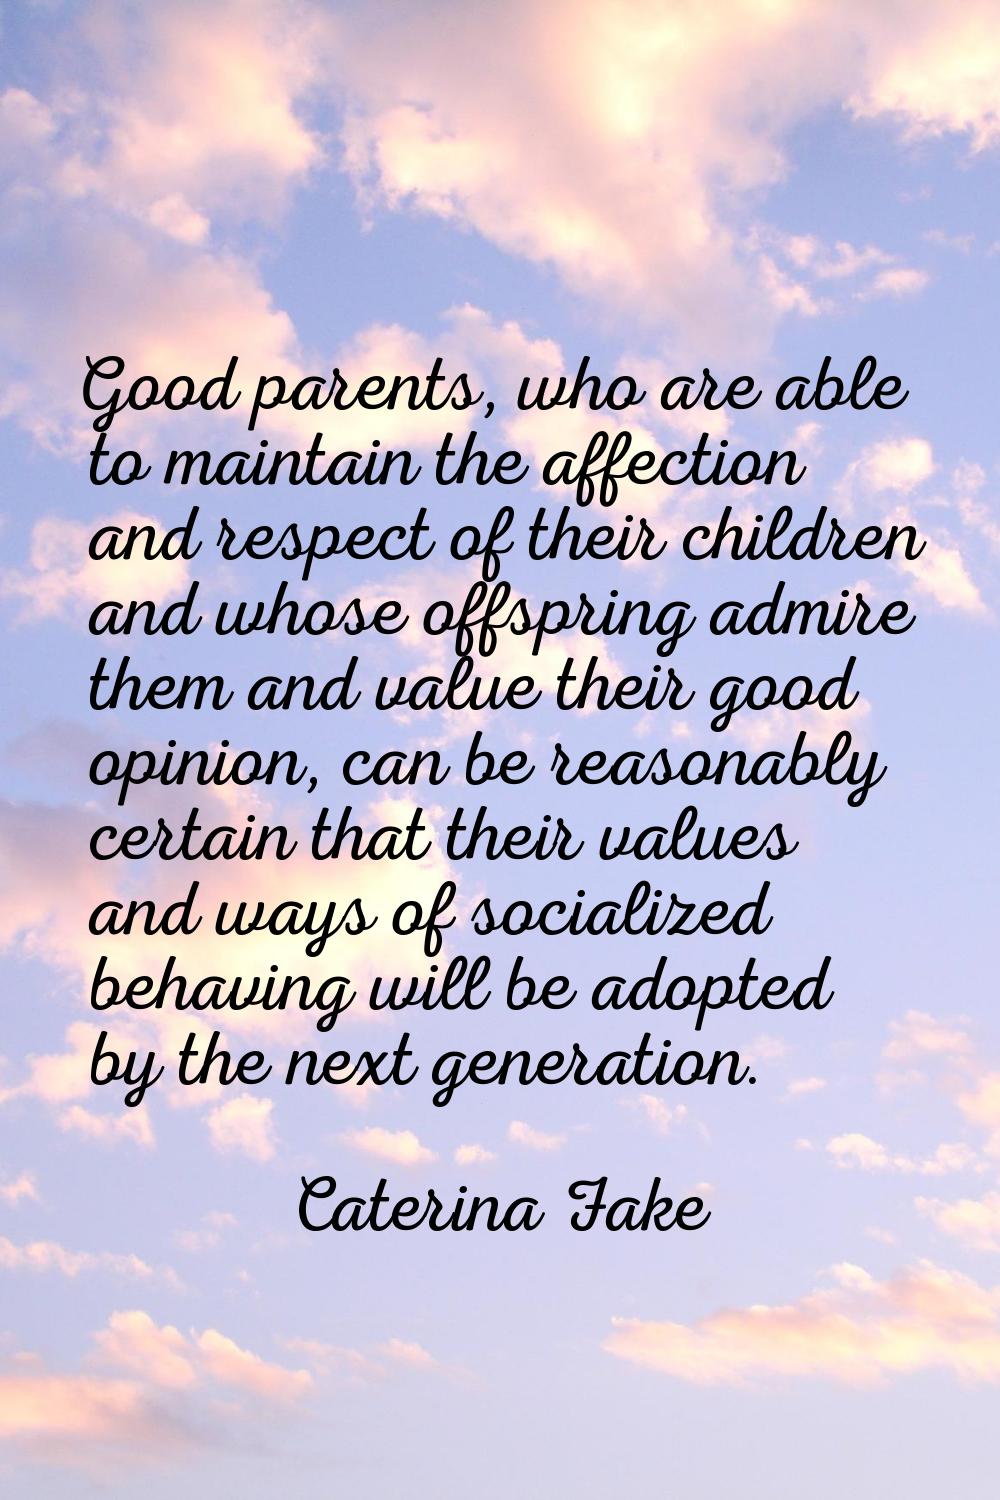 Good parents, who are able to maintain the affection and respect of their children and whose offspr